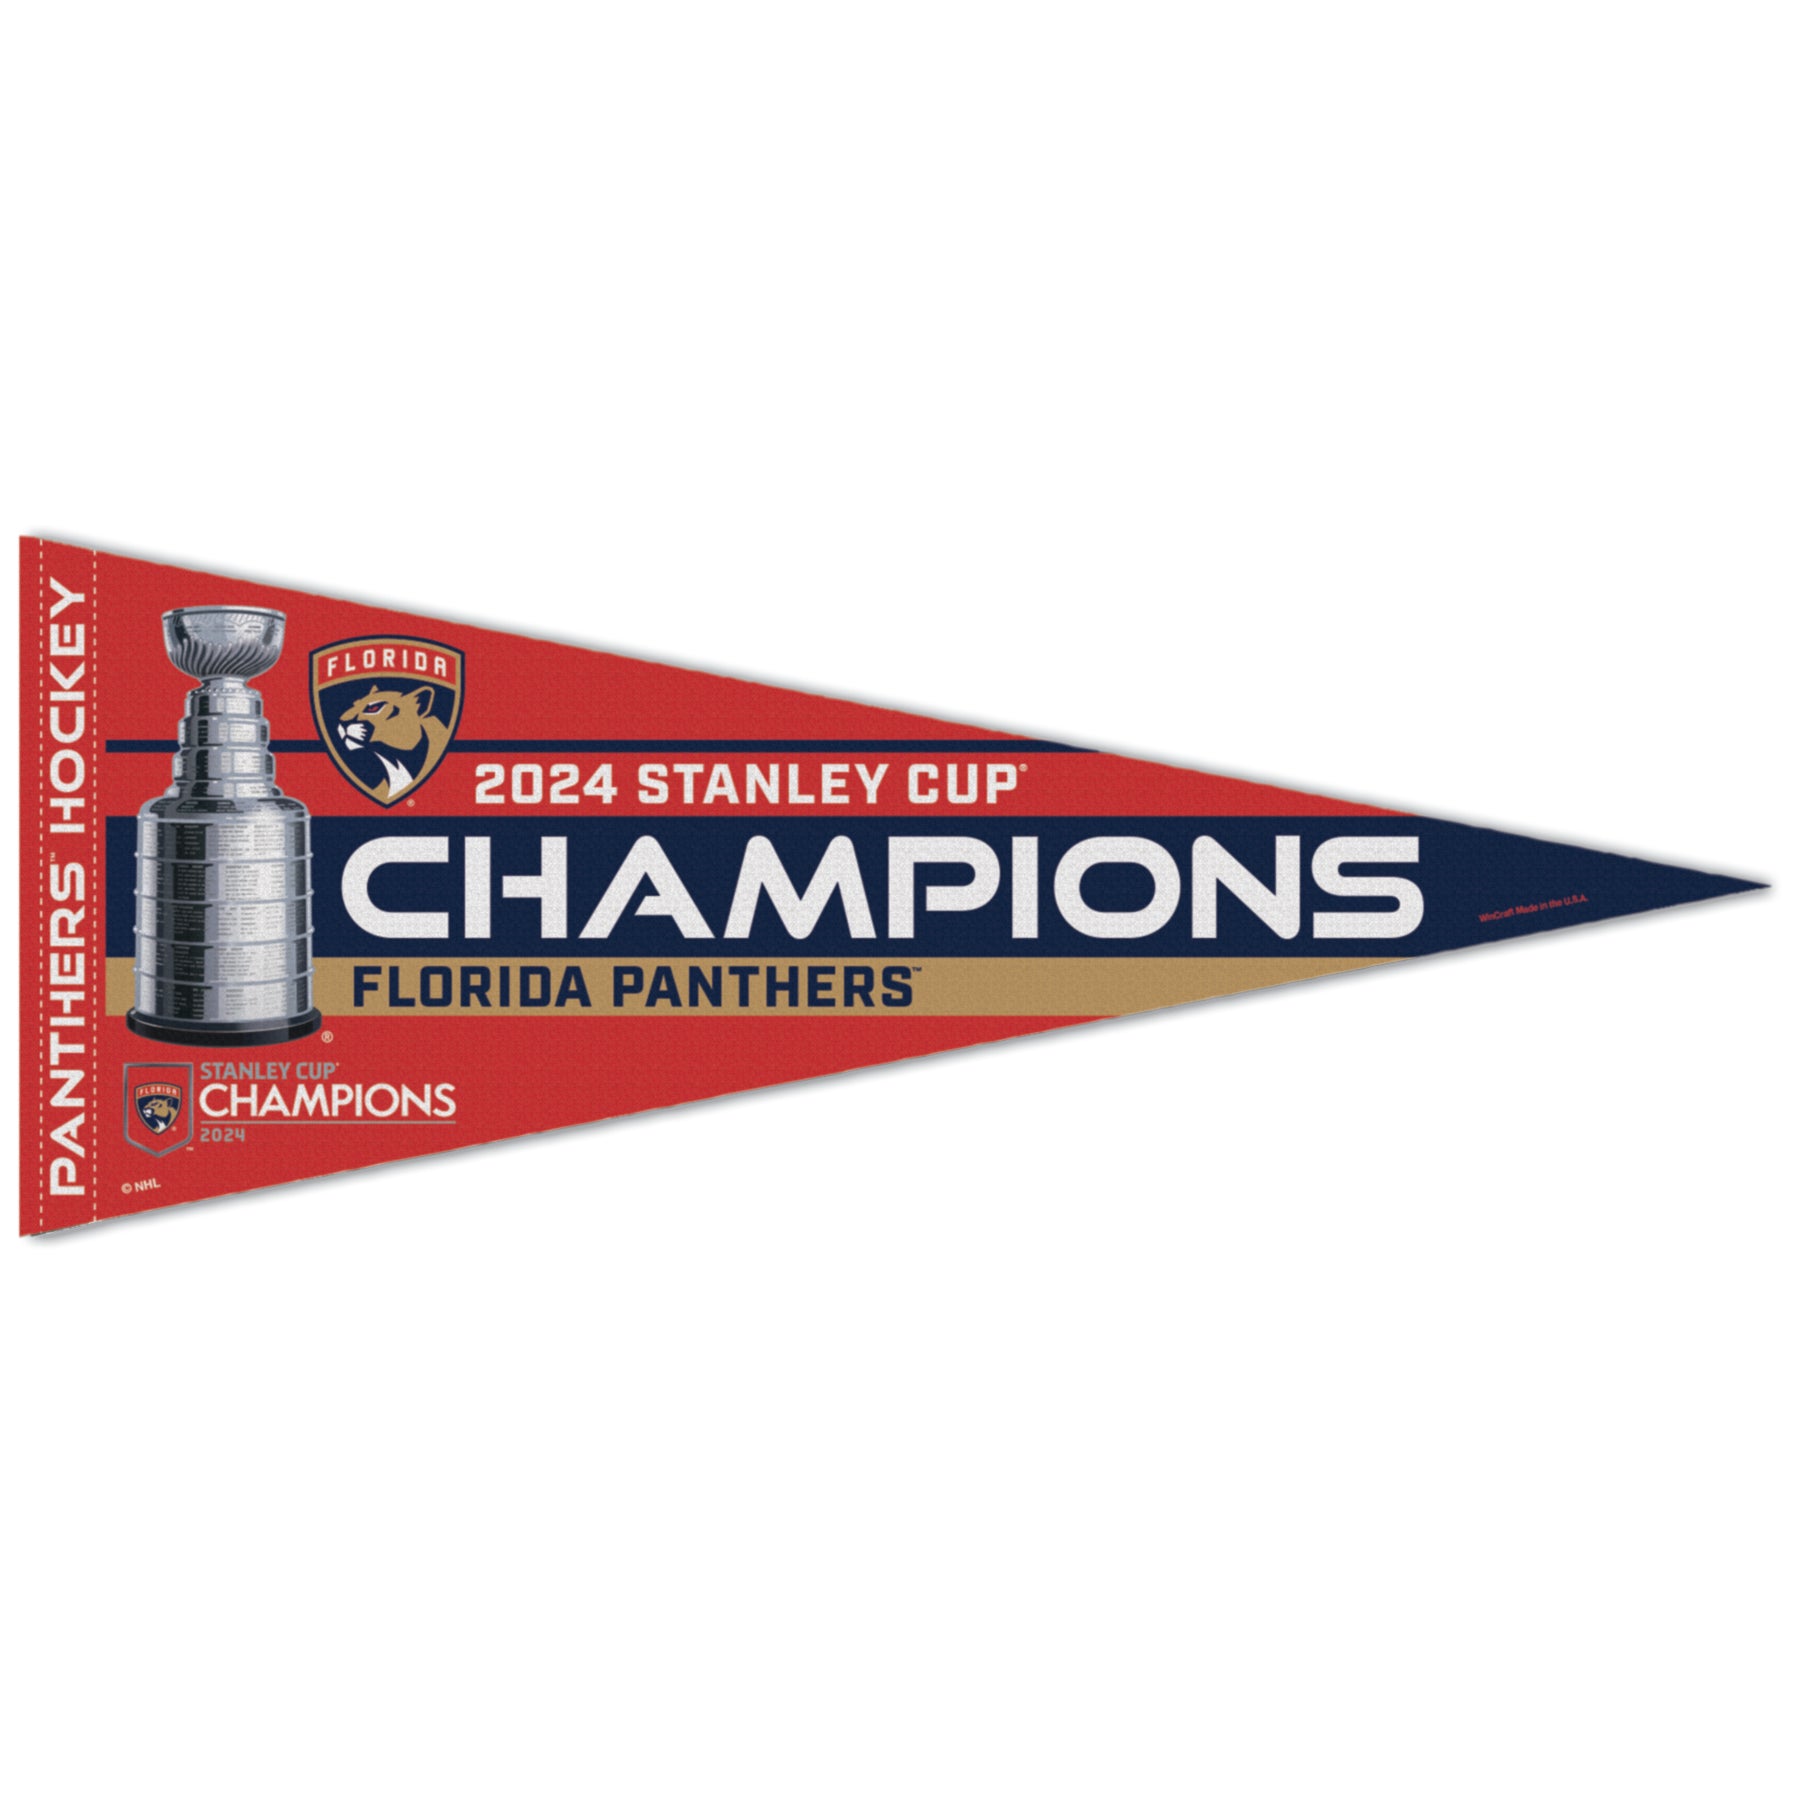 Florida Panthers 2024 Stanley Cup Champions Premium Quality Pennant - 12" x 30"